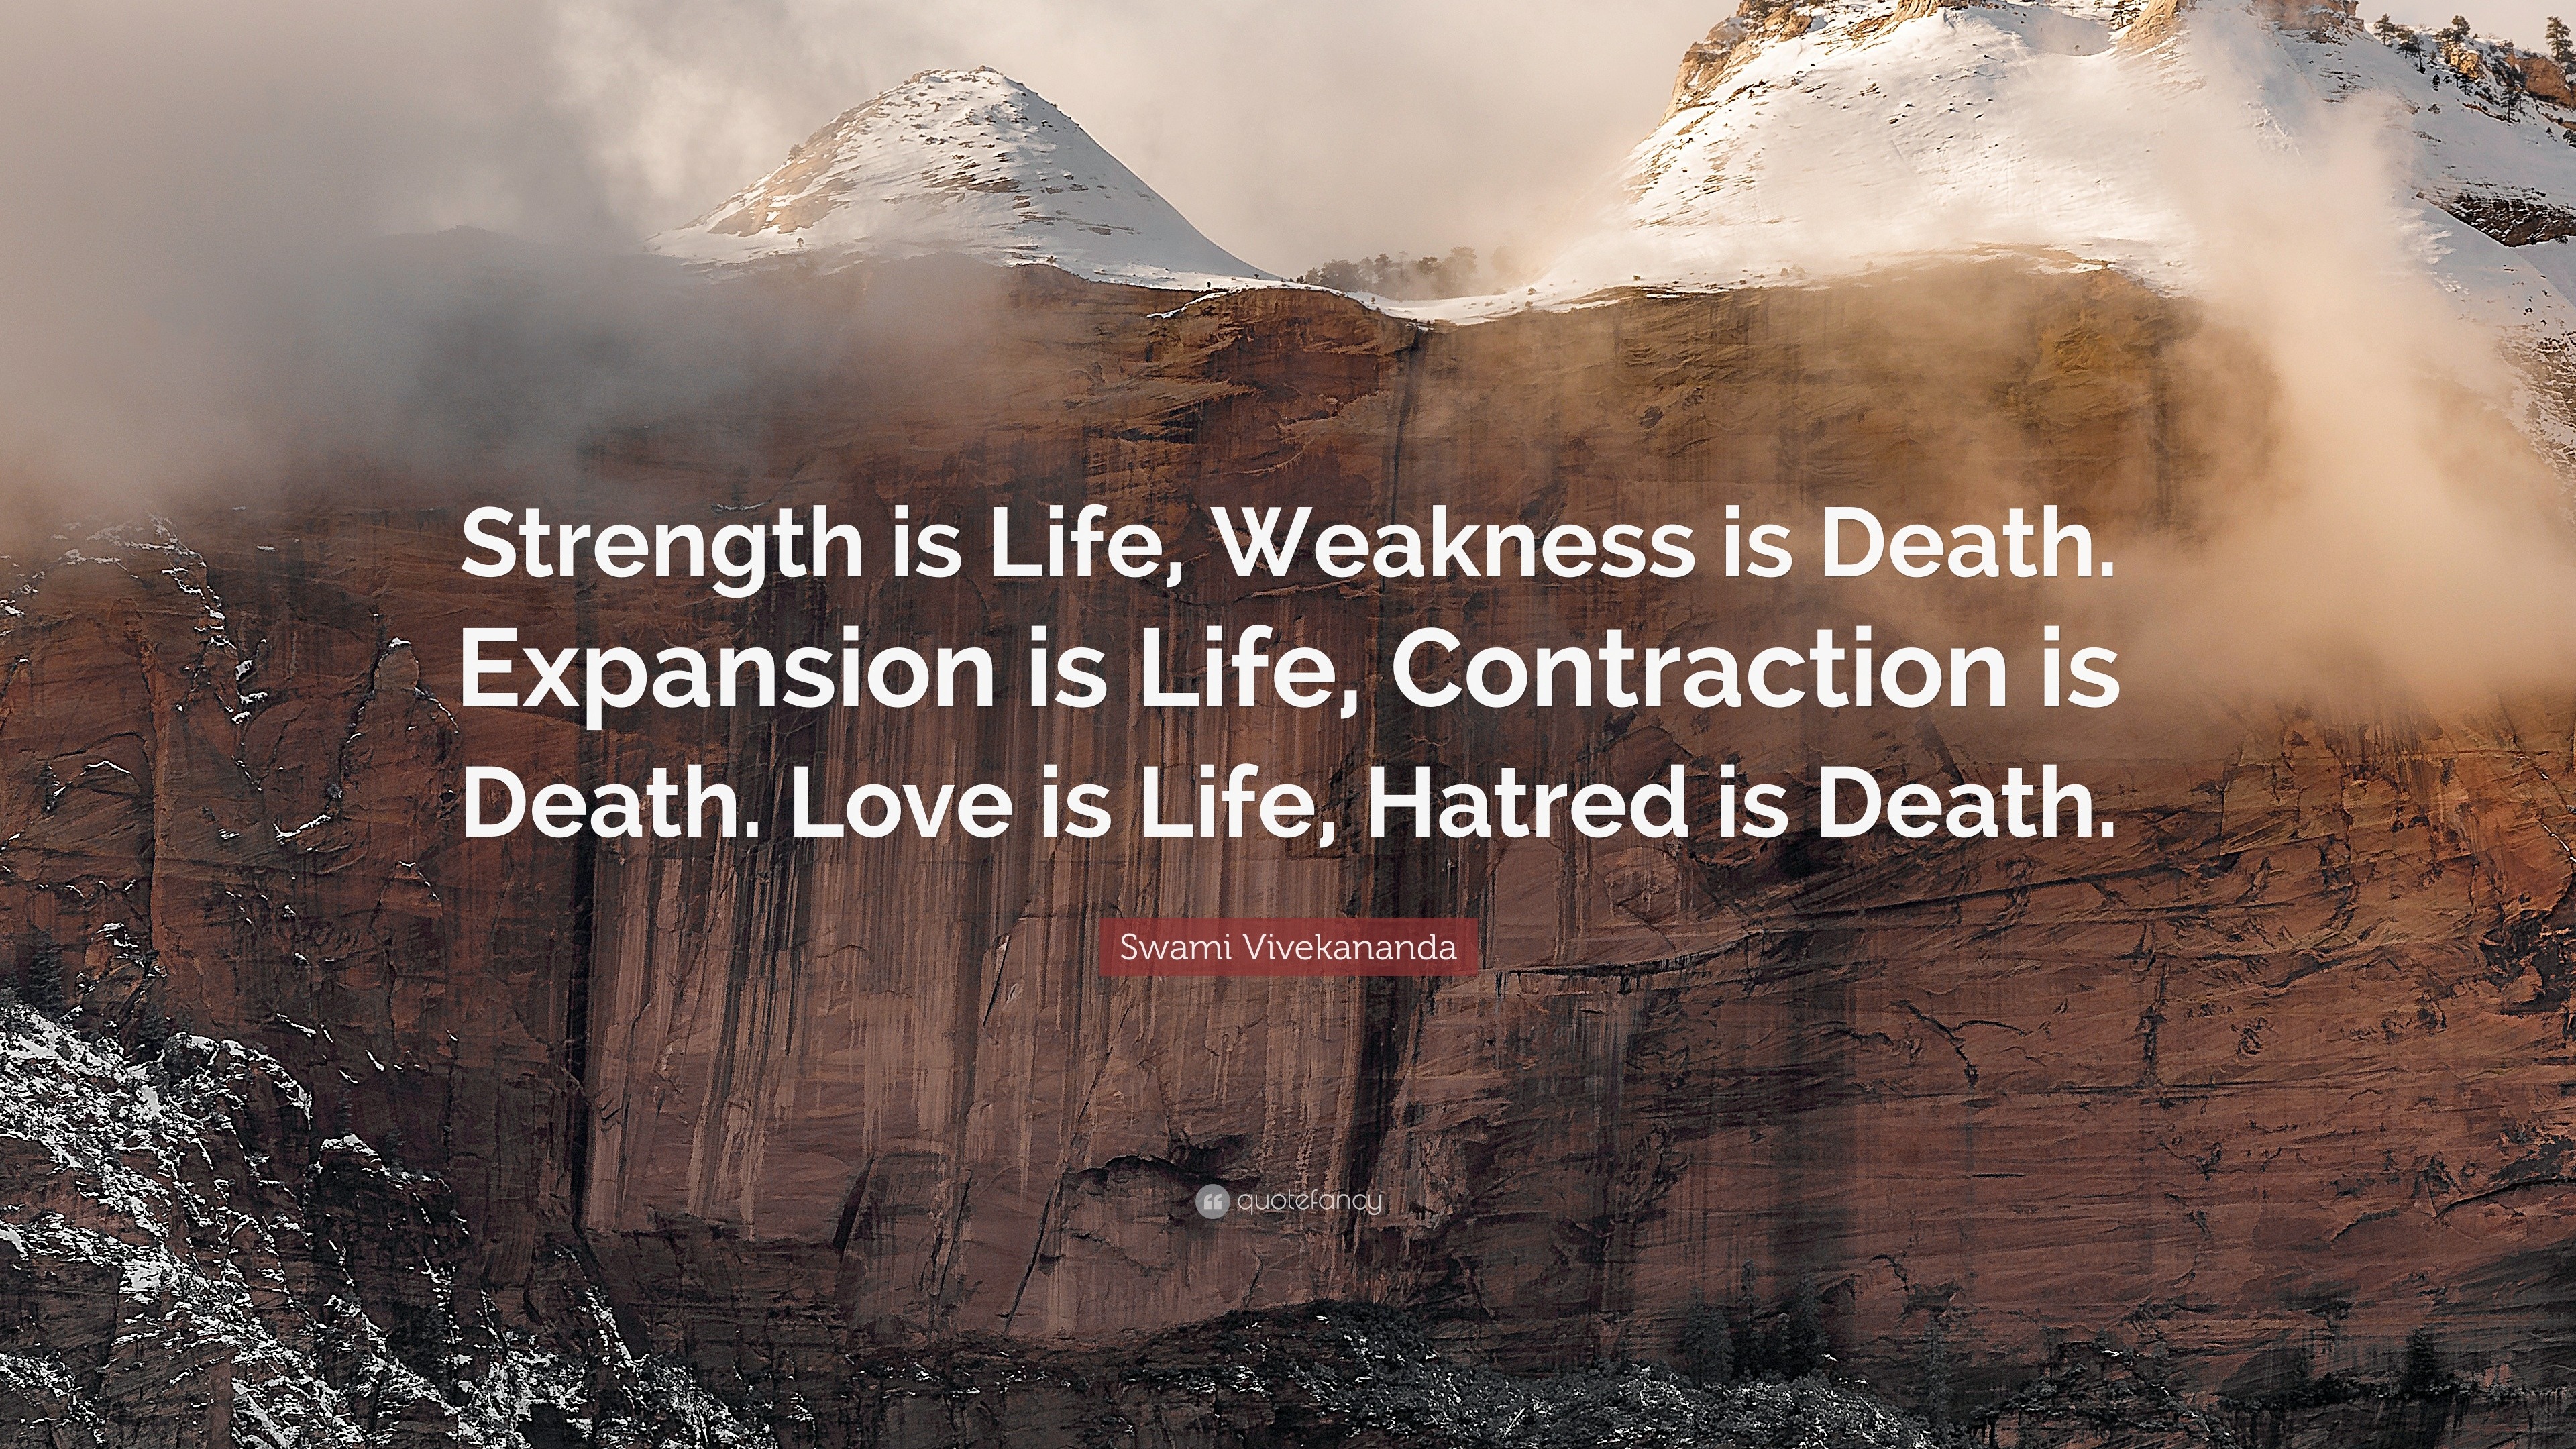 Swami Vivekananda Quote “Strength is Life Weakness is Death Expansion is Life